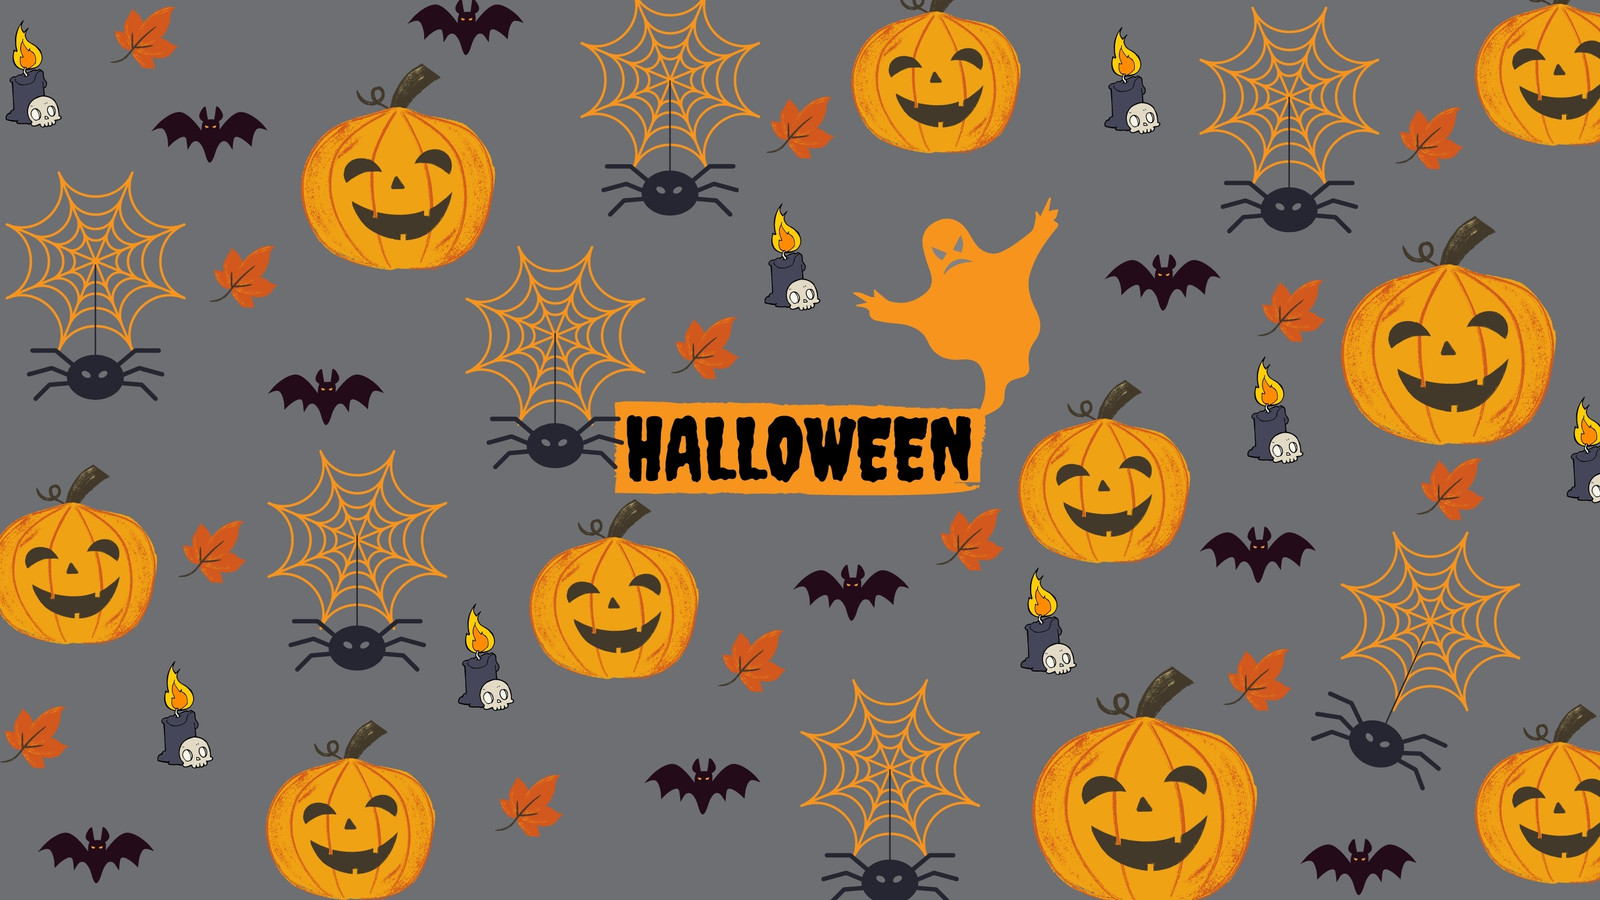 An Eerie Halloween Scene With A Pumpkin Background Aesthetic Halloween  Pictures Background Image And Wallpaper for Free Download